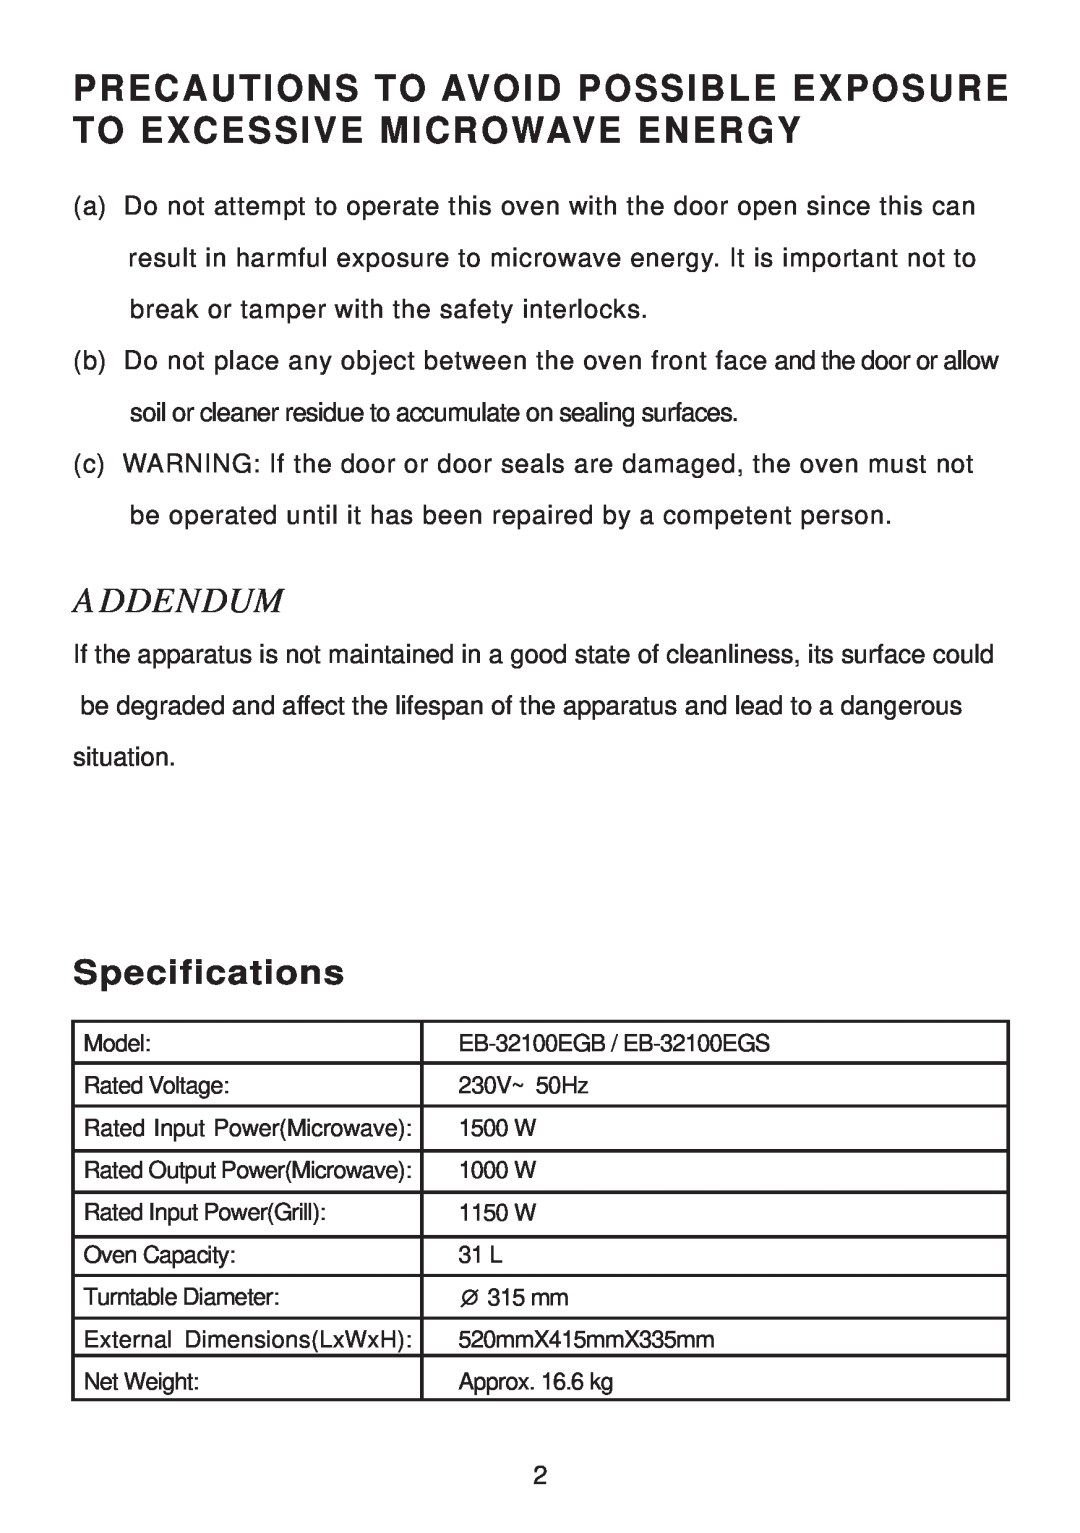 Haier EB-32100EGB manual Precautions To Avoid Possible Exposure To Excessive Microwave Energy, Specifications, Addendum 